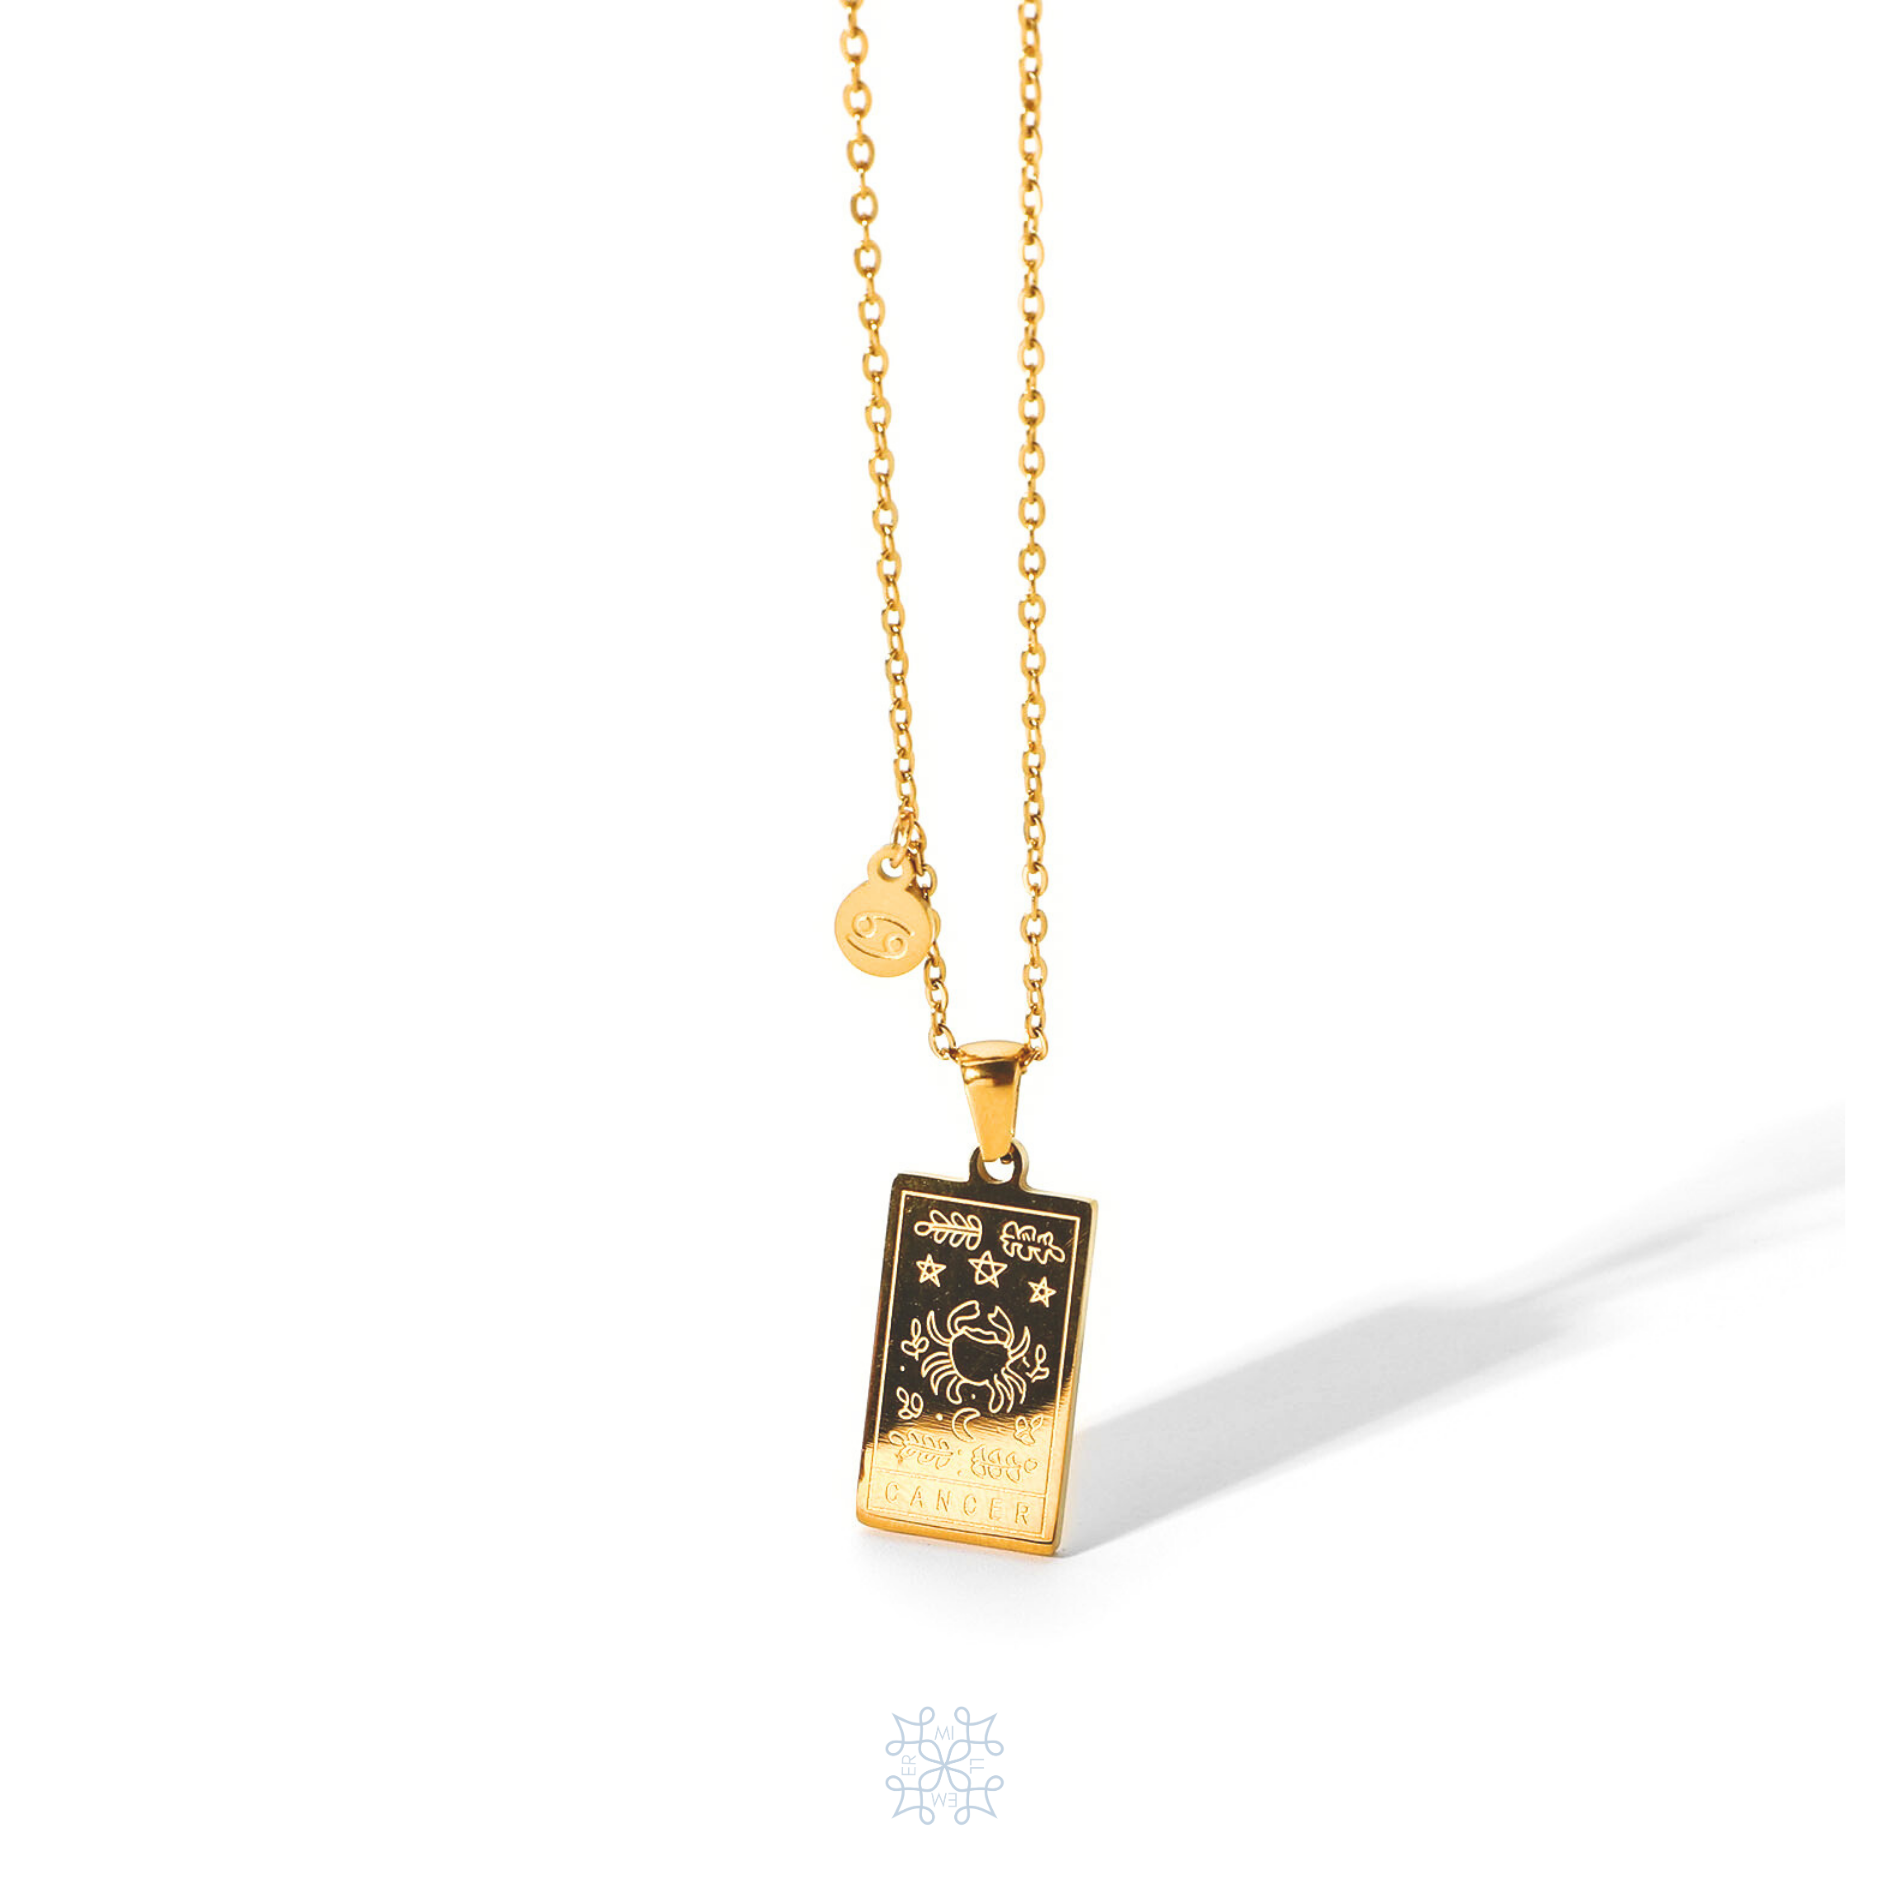 CANCER ZODIAC PENDANT GOLD NECKLACE gold pendant with a pendant hanging in a rectangular shape where the zodiac sign of the crab is engraved and the word crab is engraved at the bottom of the pendant. In the corner of the chain, next to the rectangular pendant, there is a small circle hanging with the symbol of the sign of the crab.